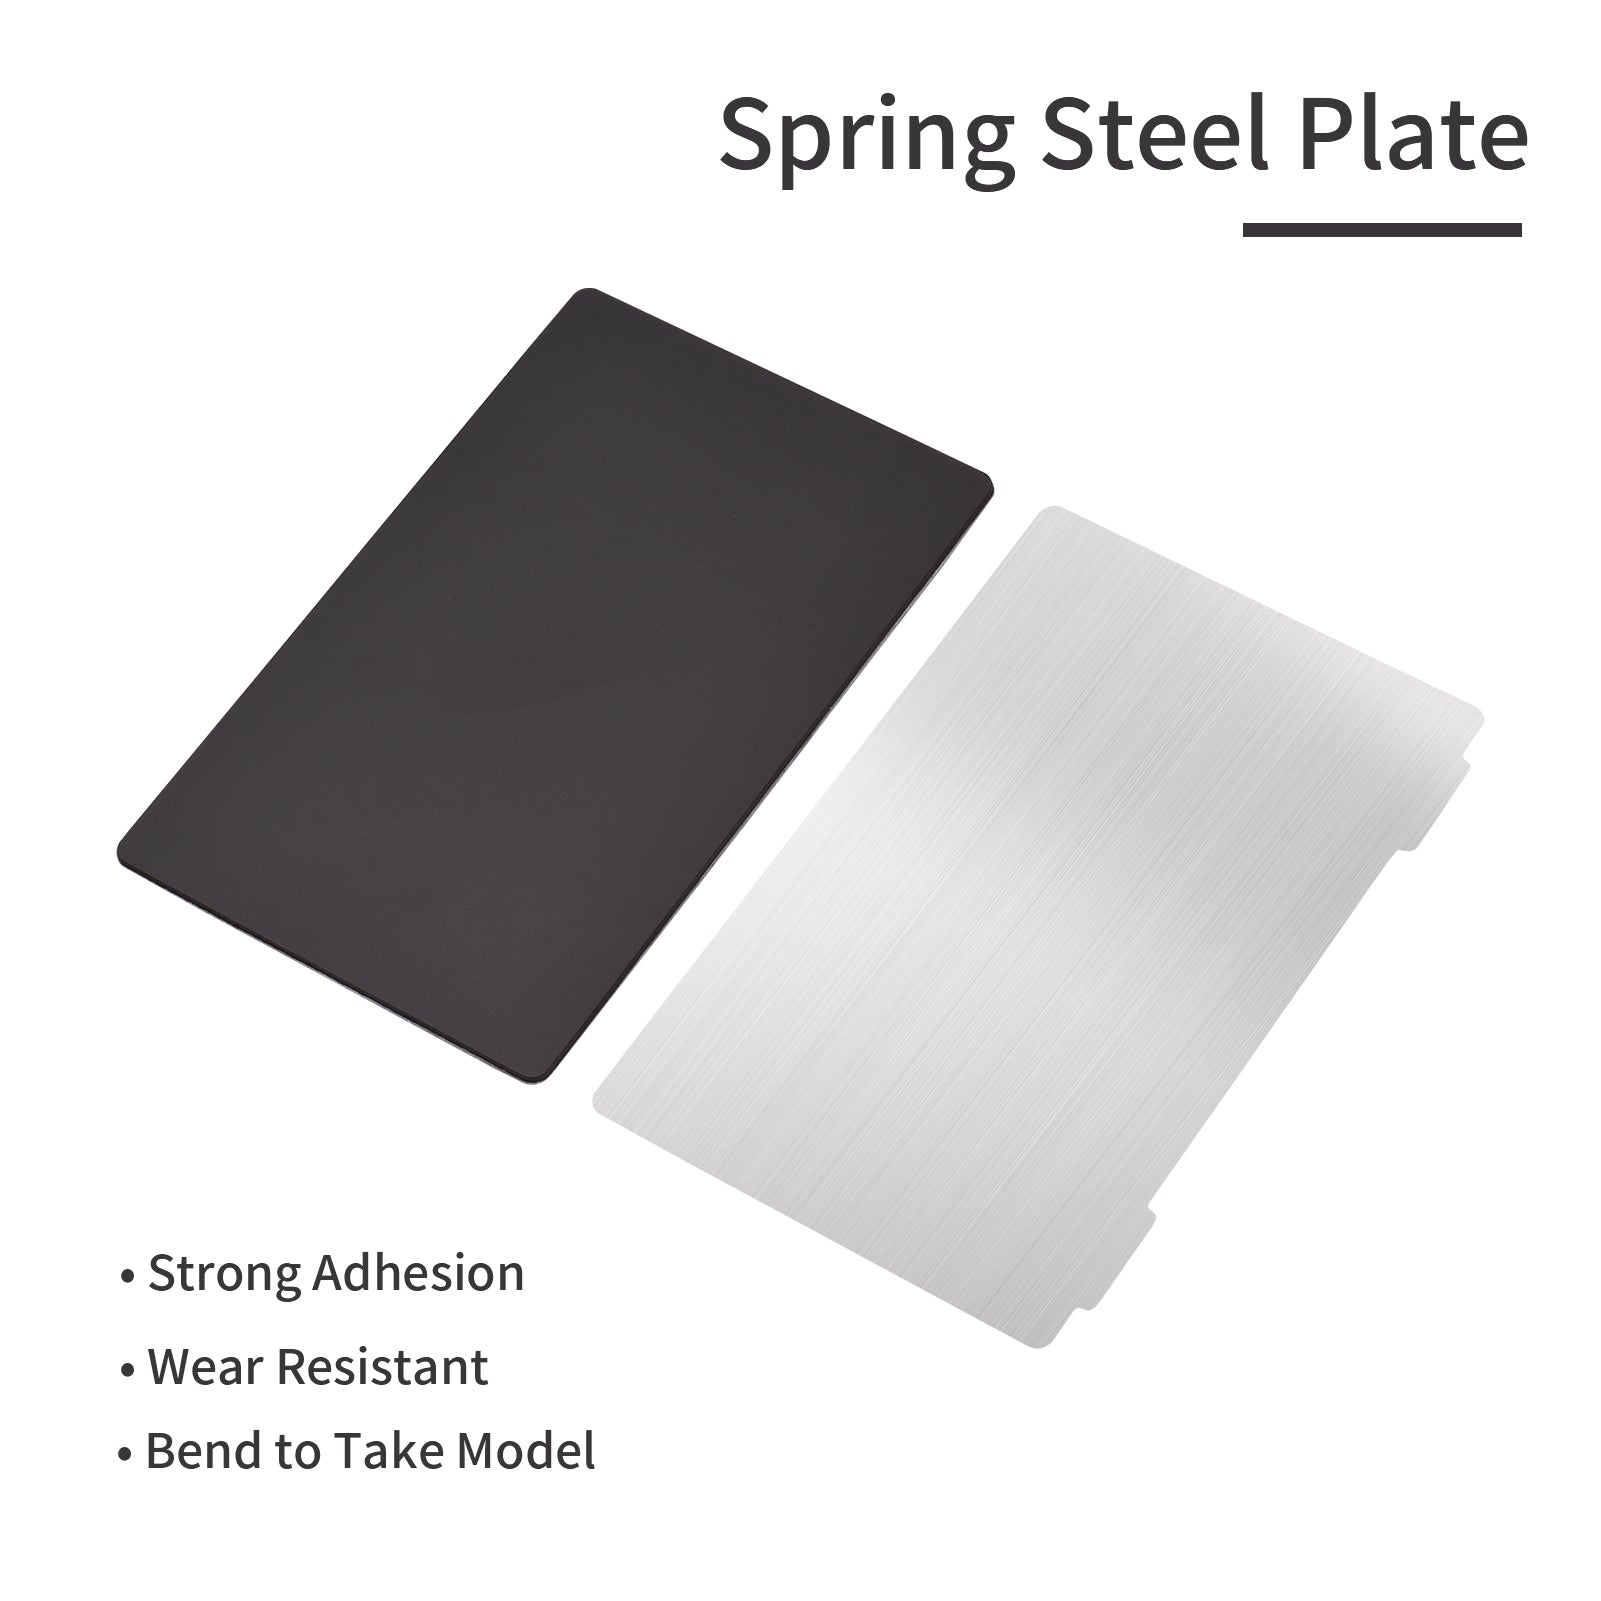 135*80mm Removal Spring Steel Flexible Build Plate Sheet for Anycubic Photon/Photon S 3D Printer